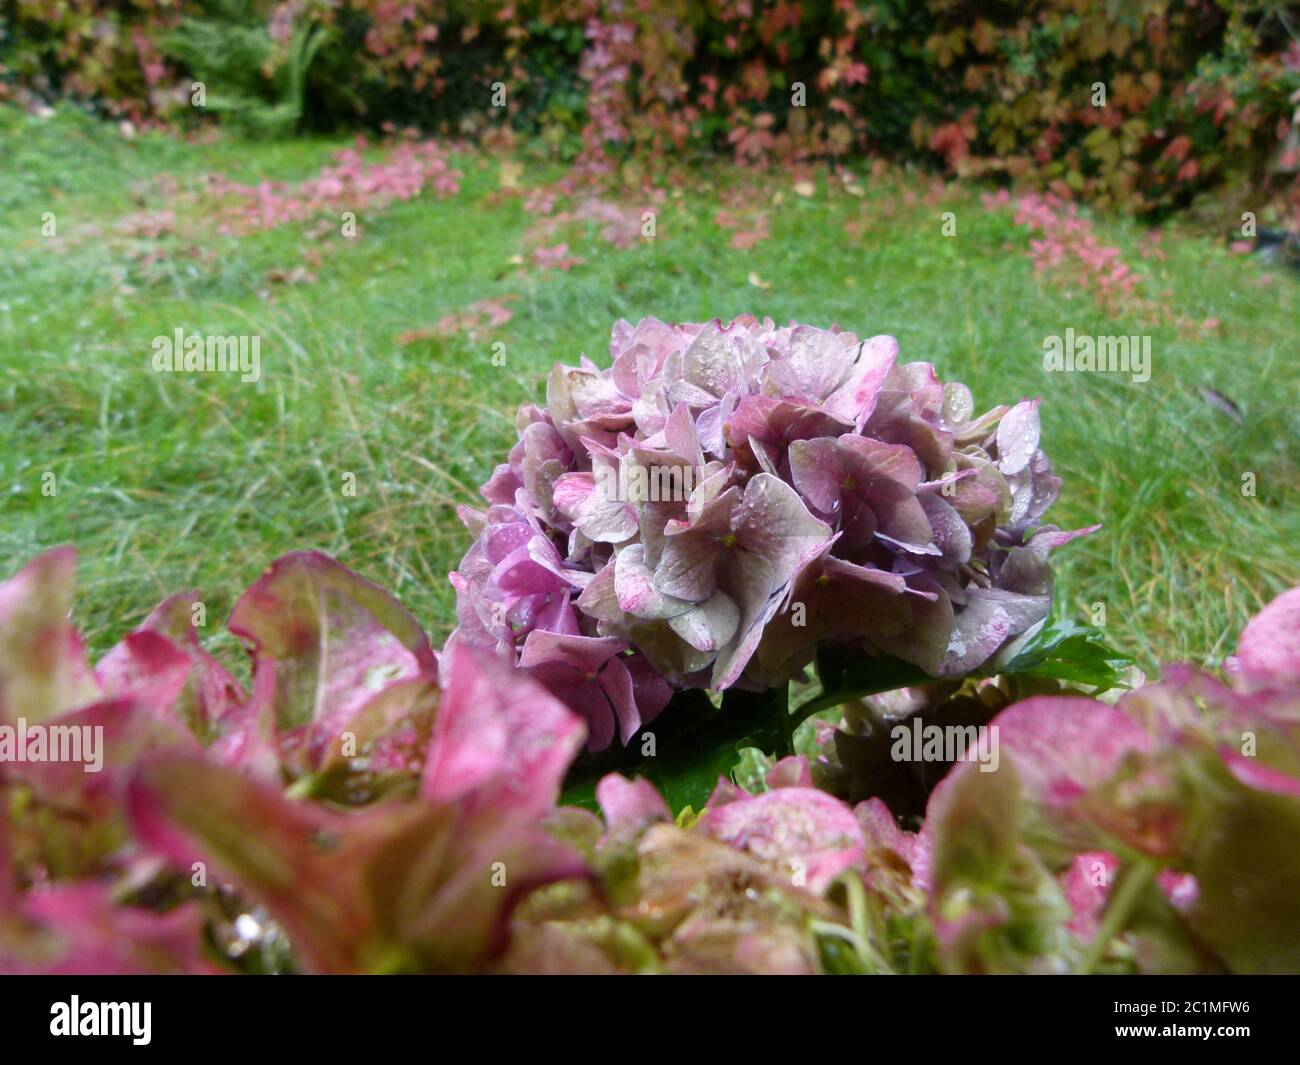 Hydrangea flower with raindrop and green grass with red leaves as background Stock Photo